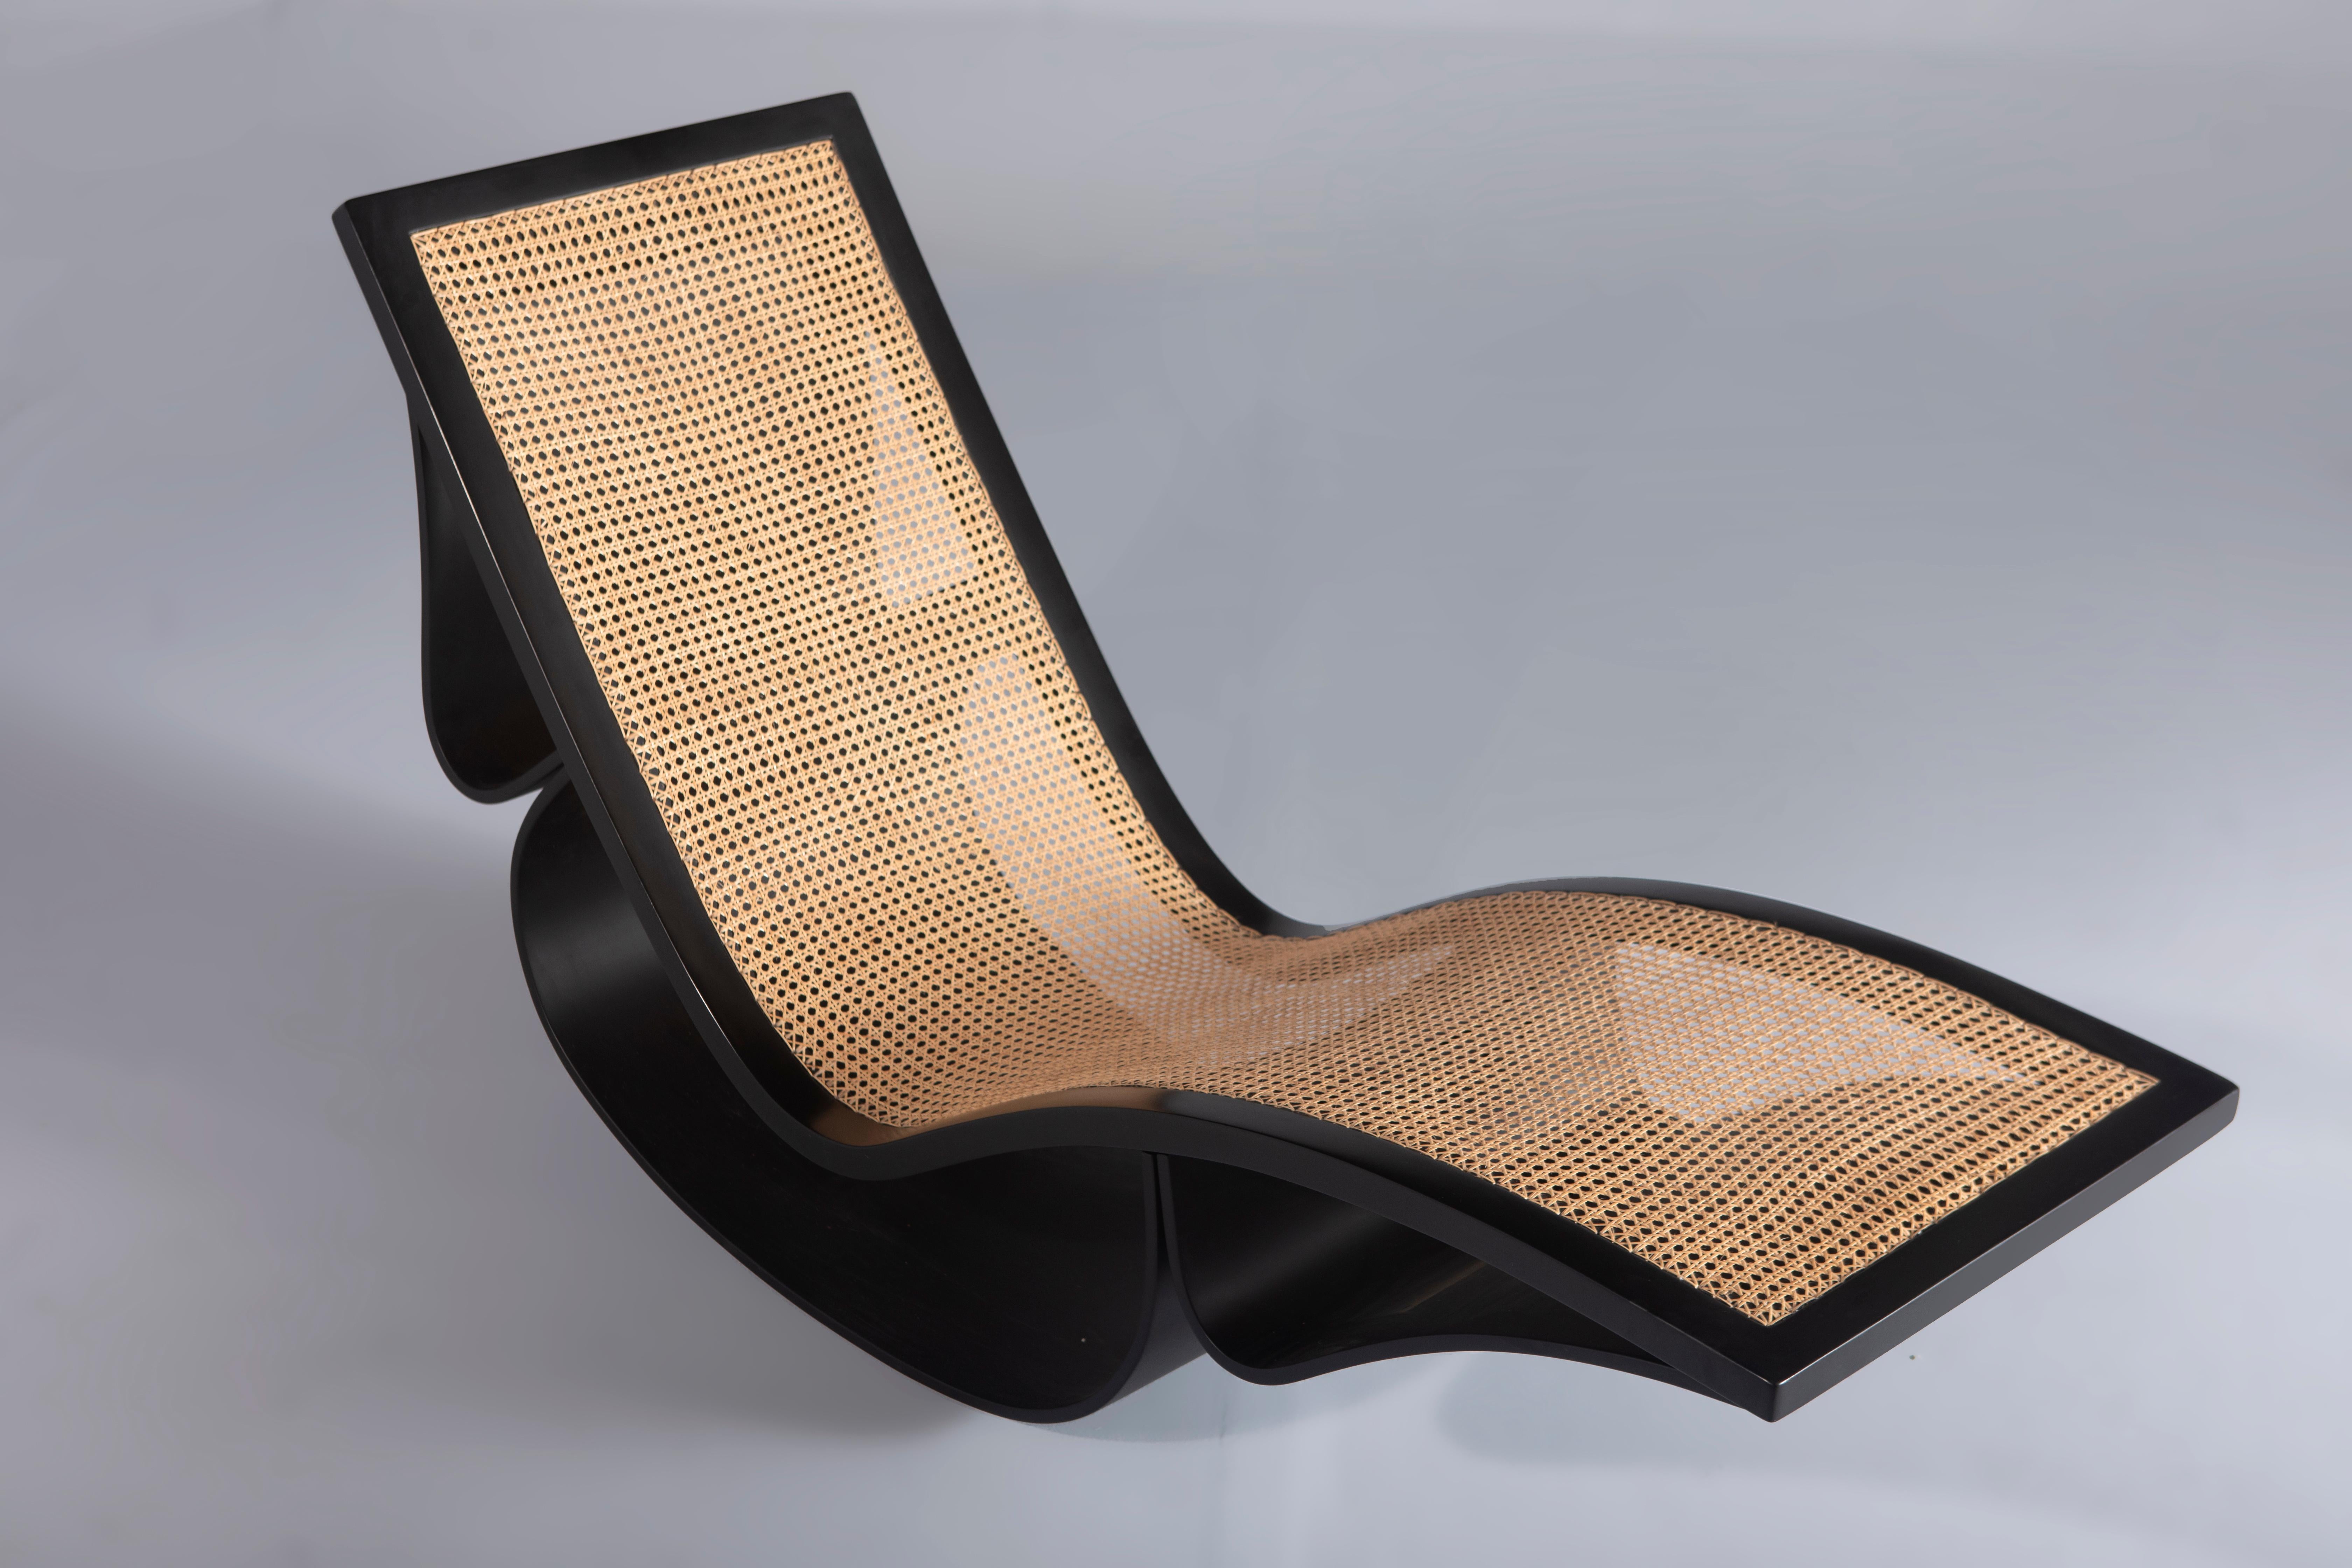 Mid-Century Modern Rio rocking chaise lounge by Brazilian Designers Oscar Niemeyer and Anna Maria Niemeyer, 1970s

The celebrated architect Oscar Niemeyer, best known for his design of civic buildings for Brasília, Brazil's capital, is lauded as one